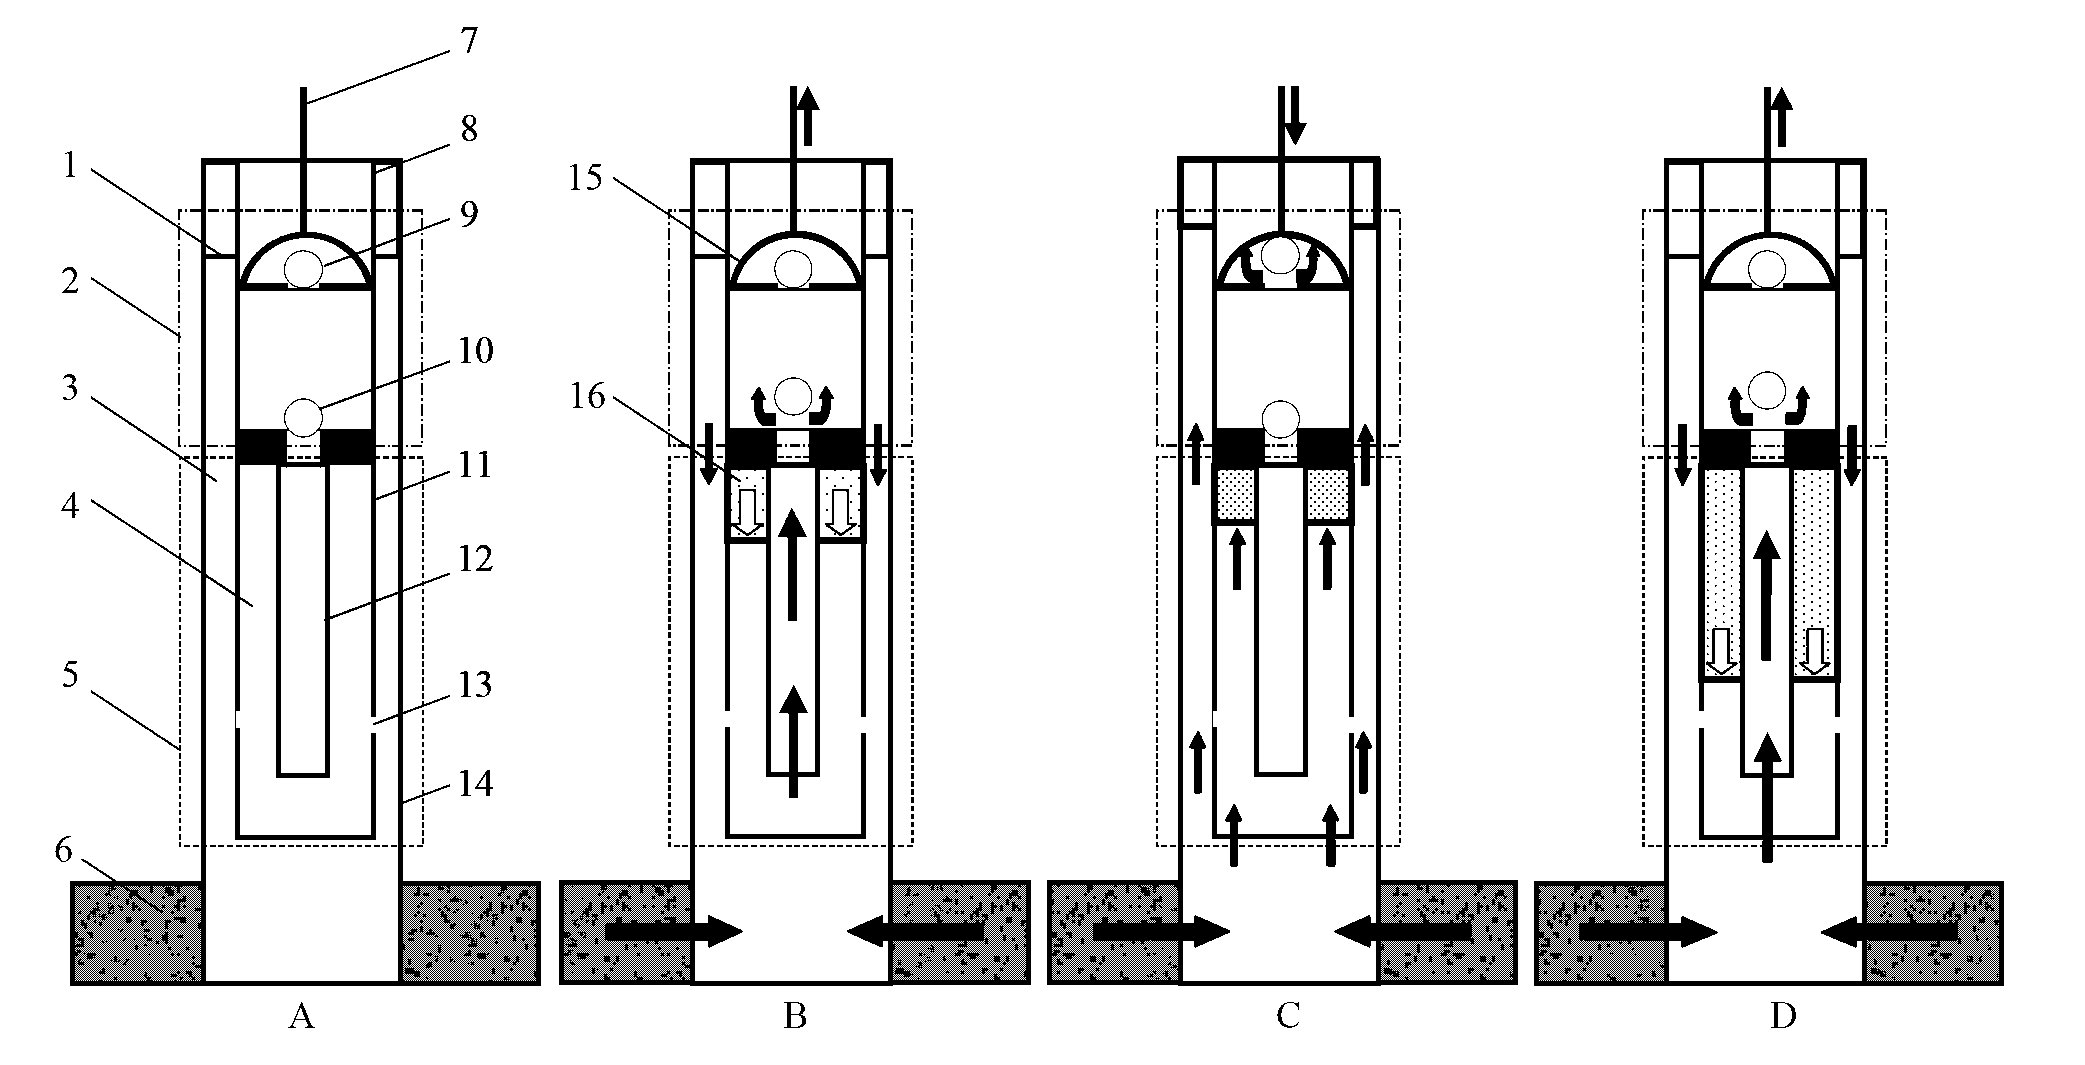 Oil-well pump energy-storage enhancing device capable of compressing natural gas automatically